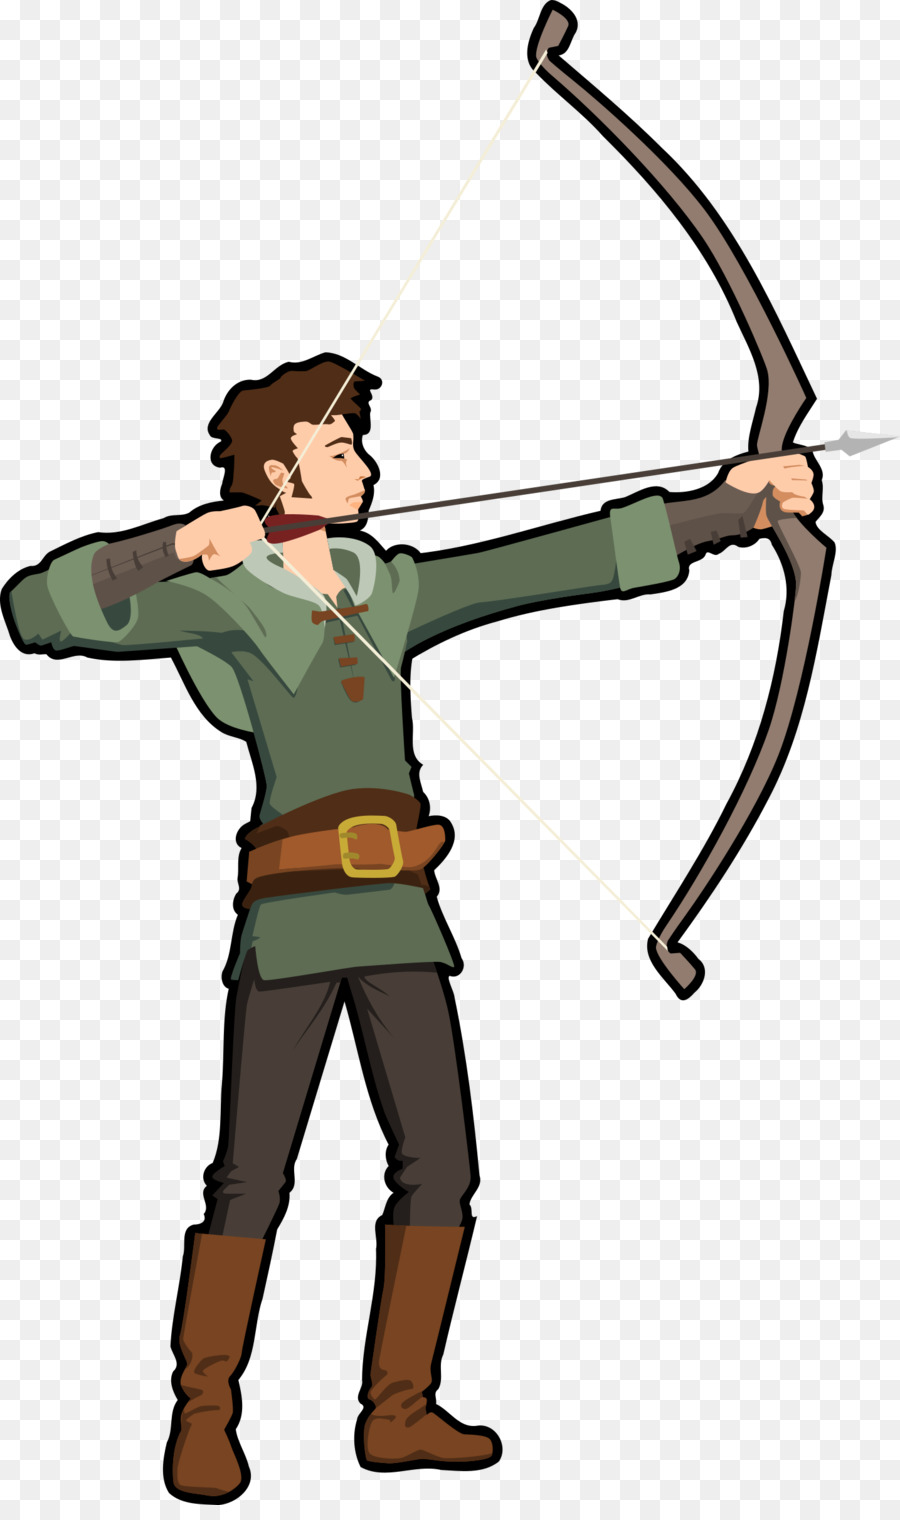 Bow And Arrowtransparent png image & clipart free download.